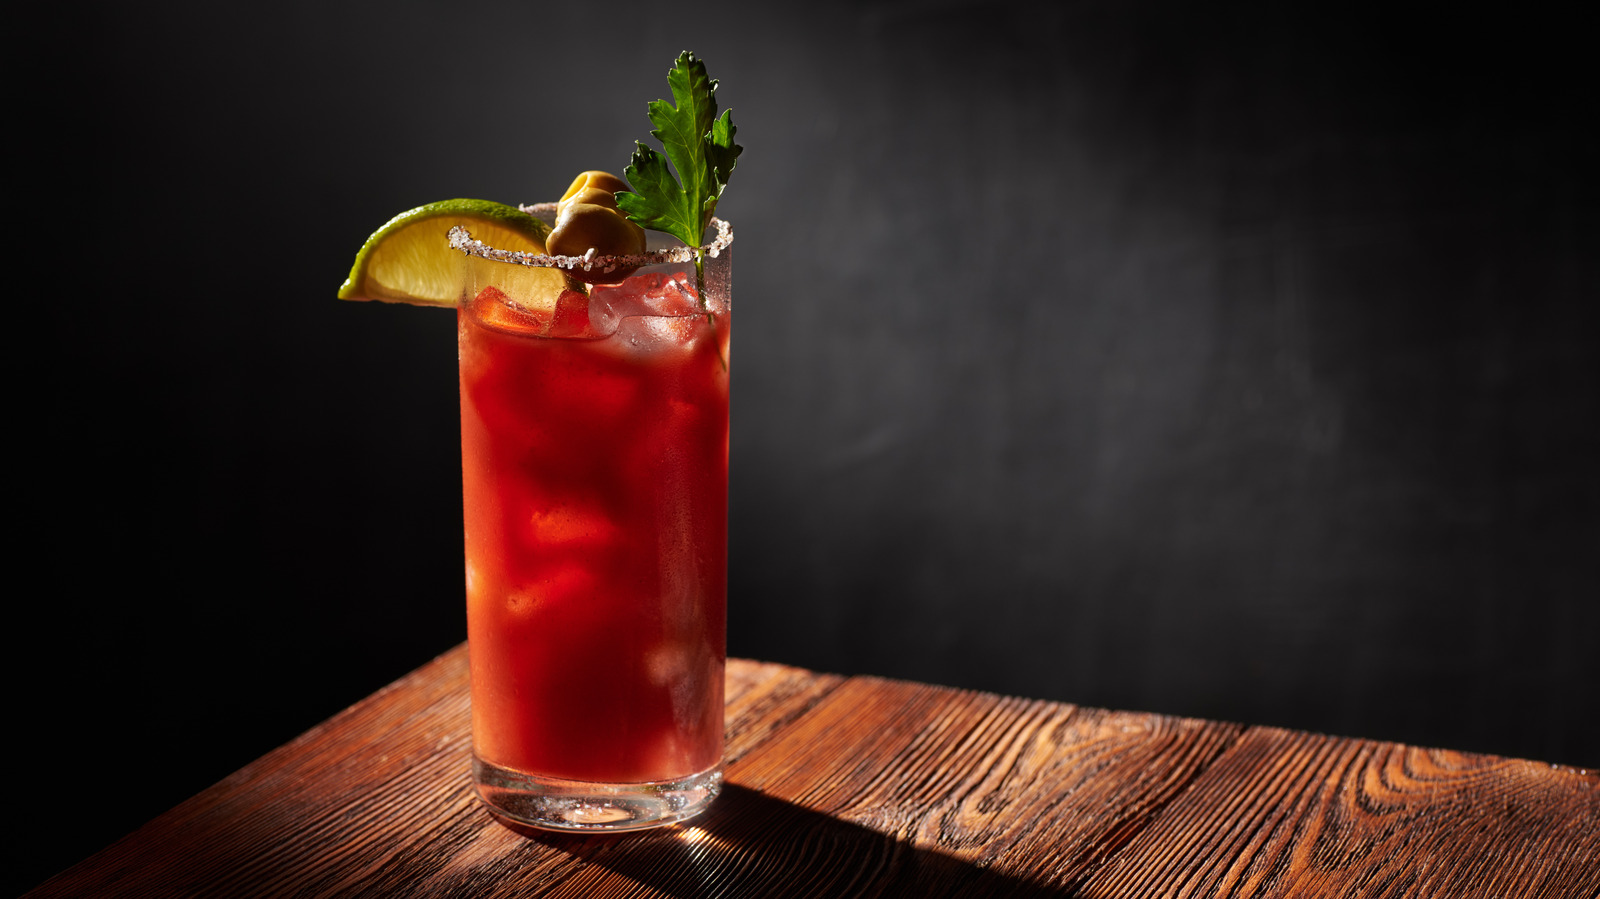 Paris marks bloody mary cocktail's 100th birthday